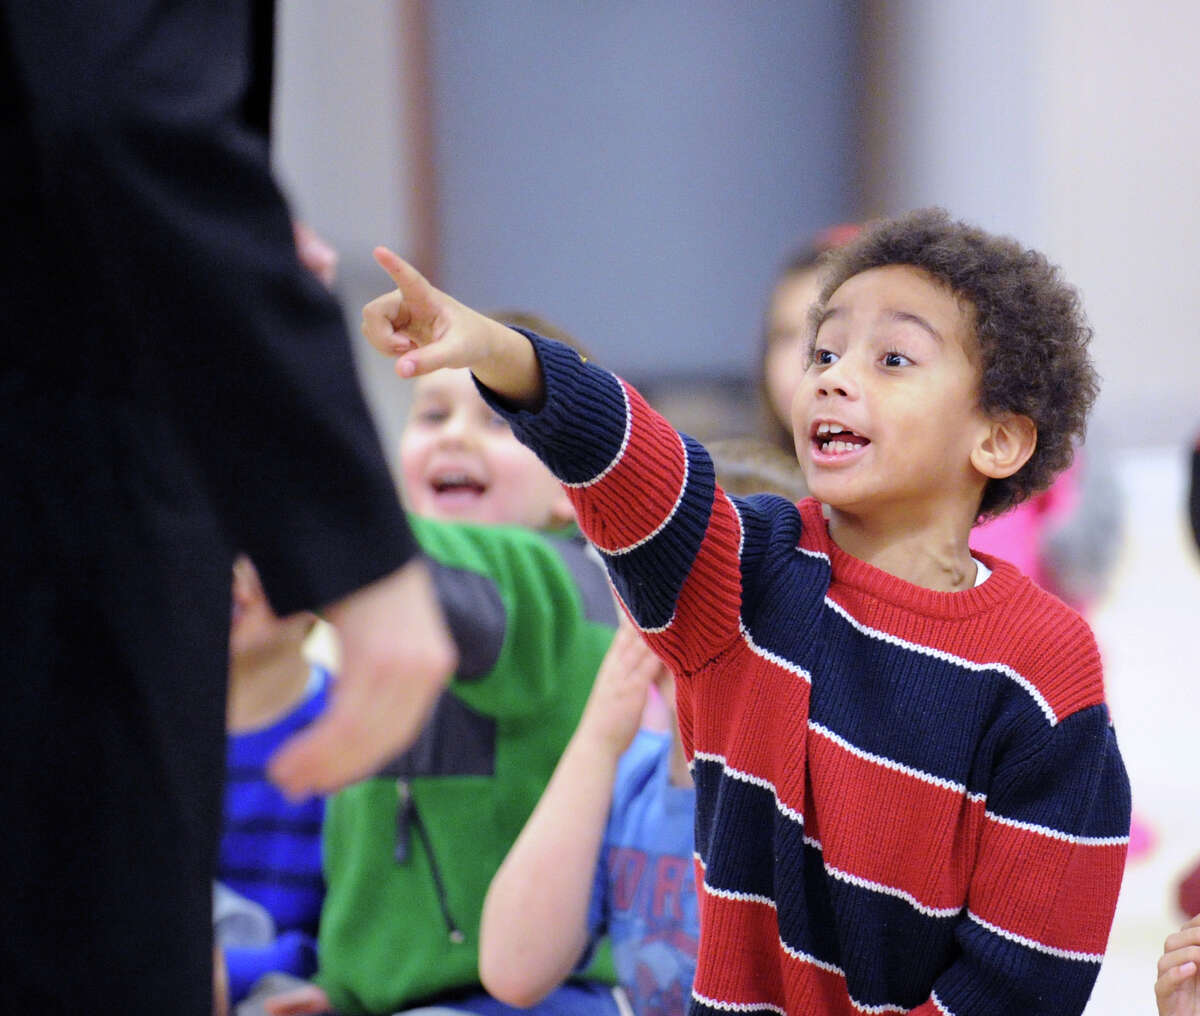 Tristan Caldwell, 6, of Greenwich, reacts to the ghost of Jacob Marley during a performance of "A Christmas Carol" at the Western Greenwich Civic Center, Wednesday, Nov. 28, 2012. The program was sponsored by the Parks and Recreation Board and was specifically geared toward children in kindergarten through sixth grades.